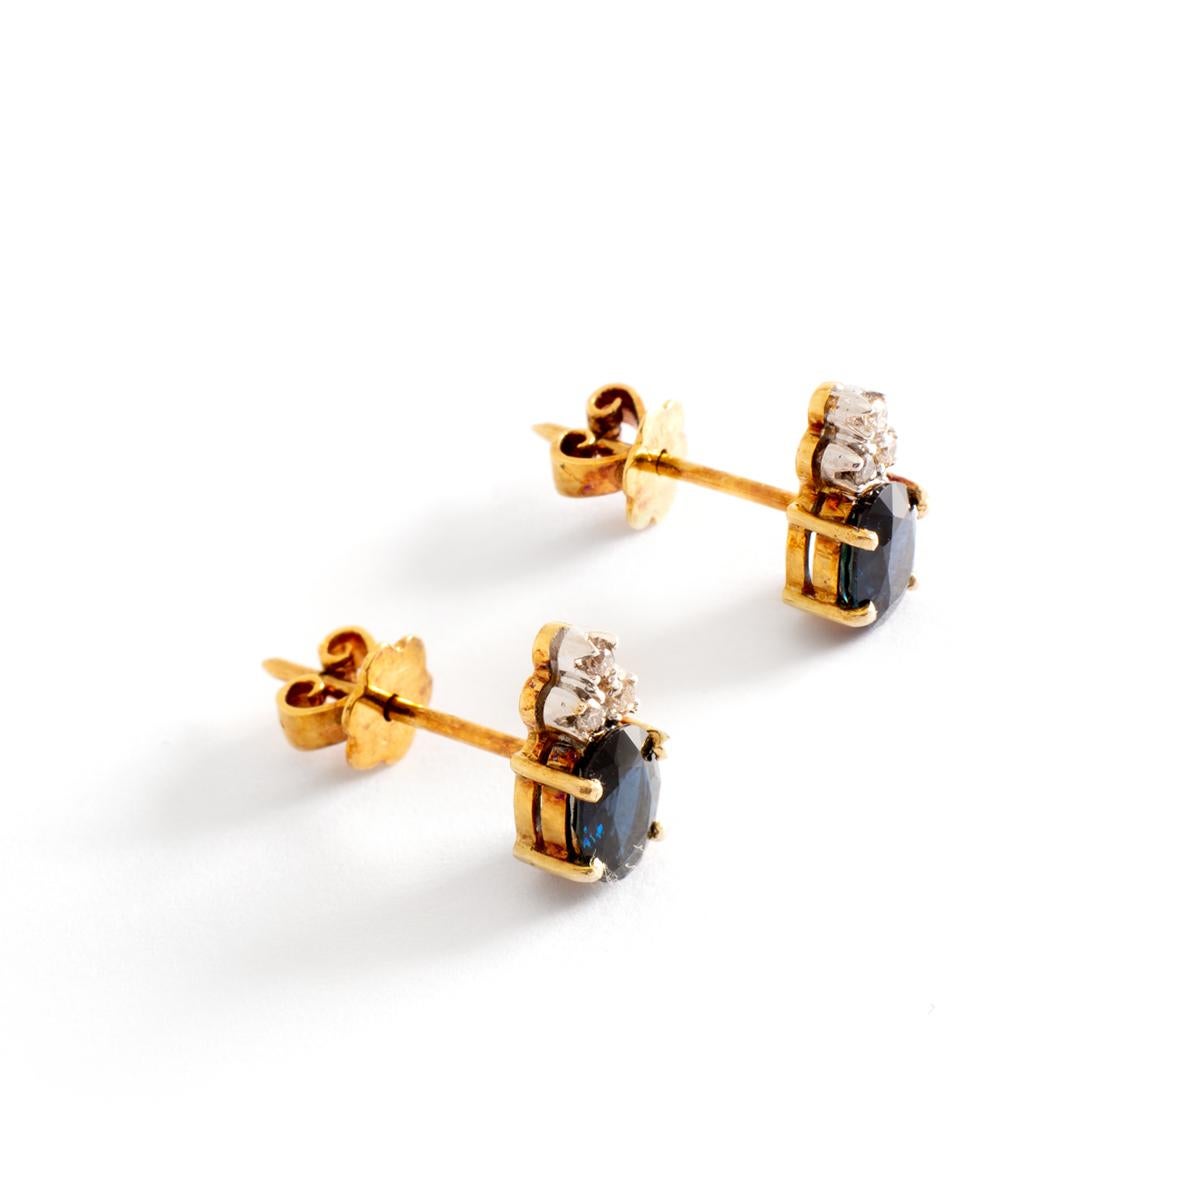 Ear Studs Earrings Oval Sapphire and Diamond claw set on Yellow Gold 18K.
Sapphire Oval height: 6.51 millimeters.
Earrings height: 1.00 centimeter.
Earrings width: 0.60 centimeter.
Gross weight: 2.67 grams.
